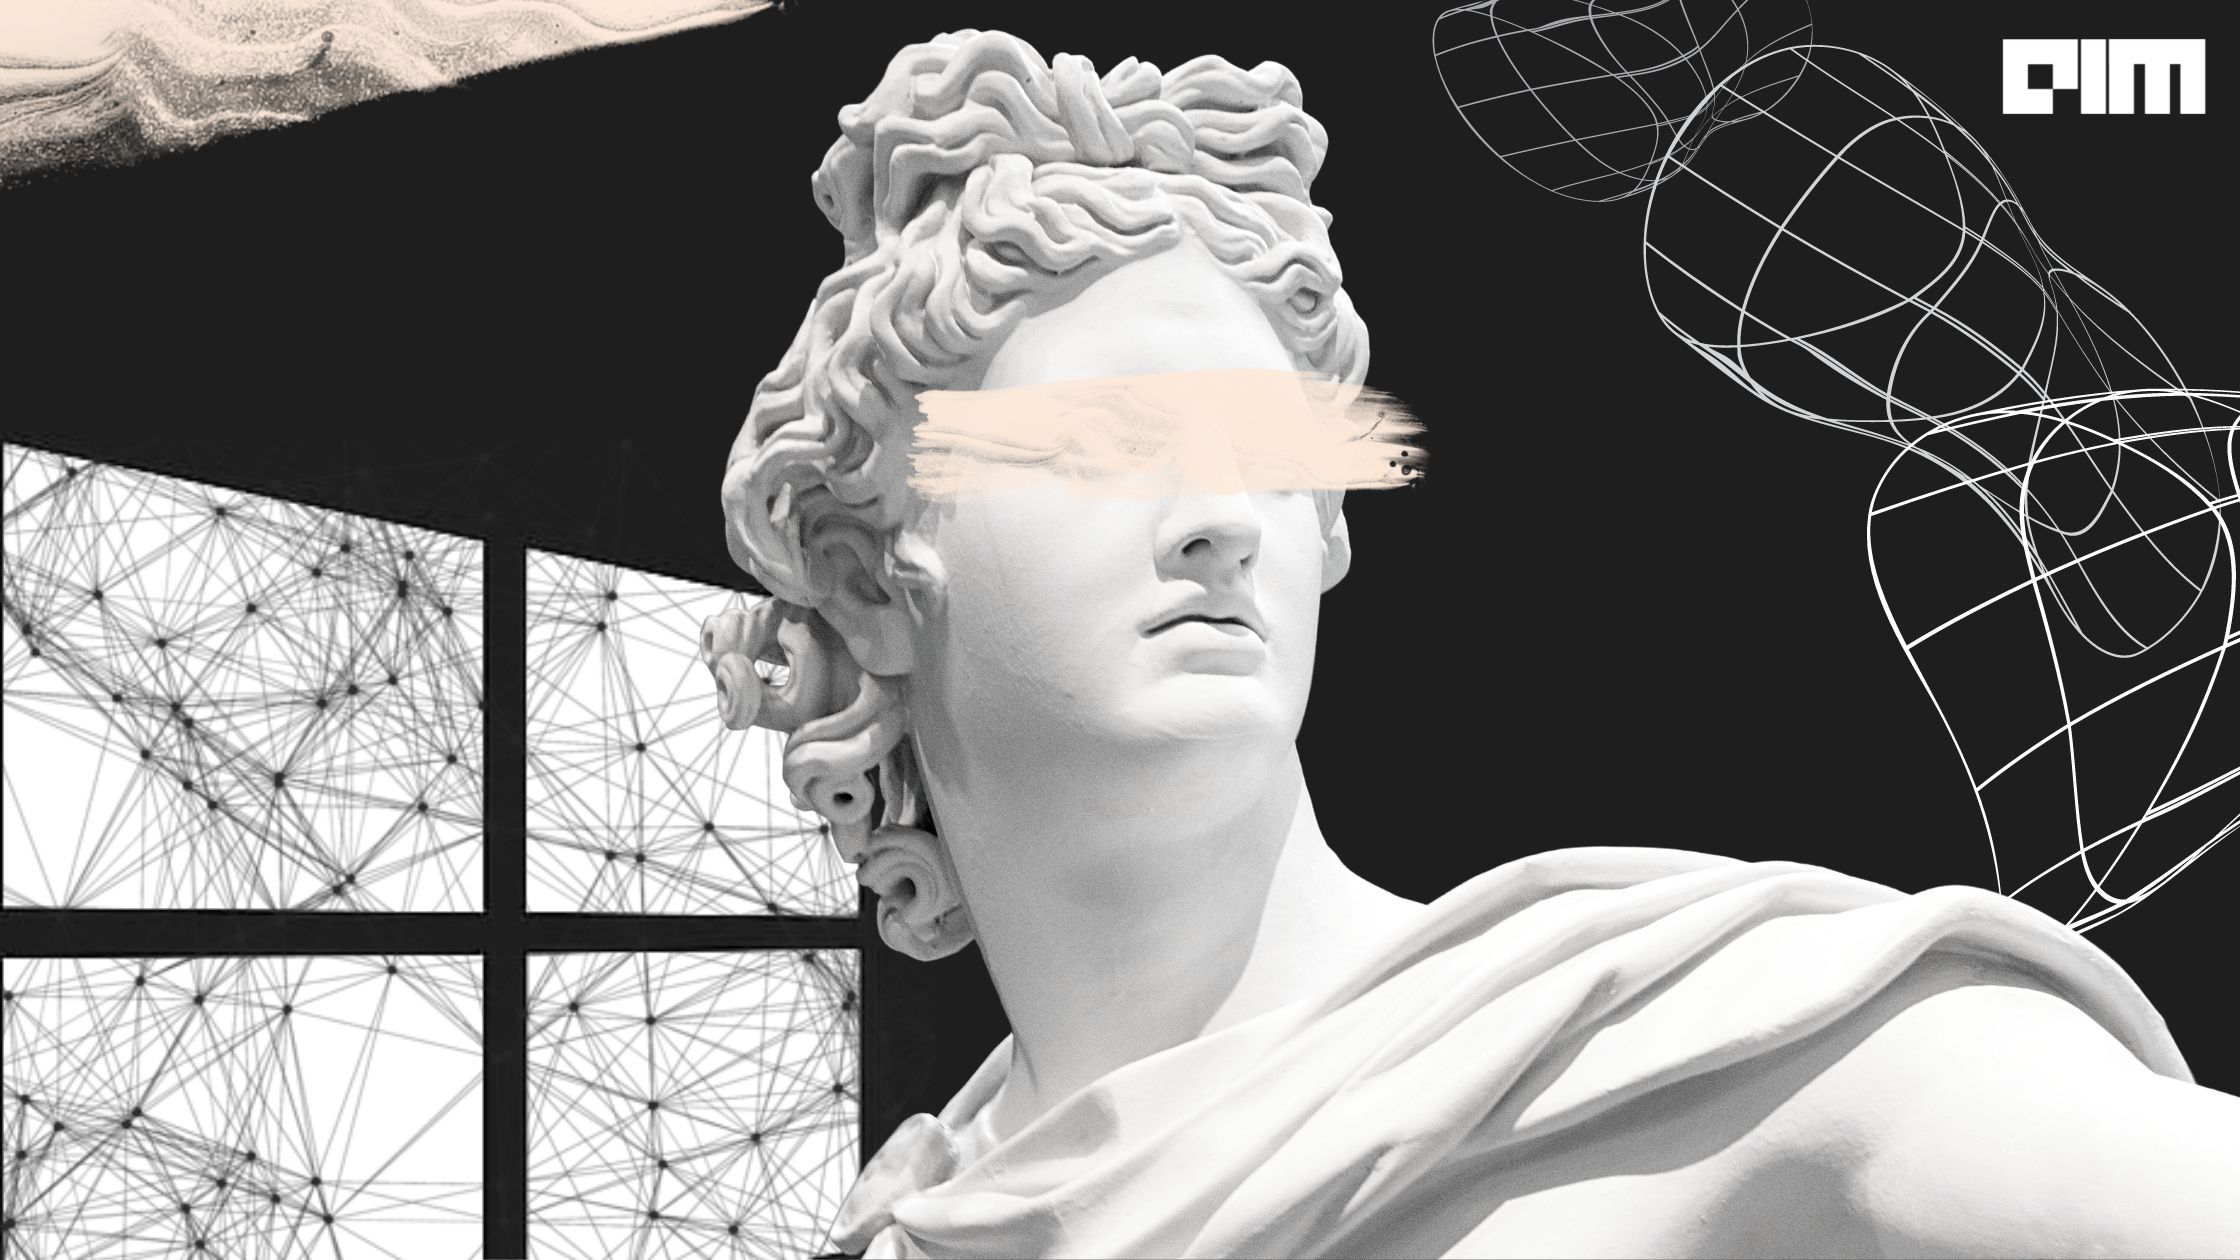 A collage of a statue of Apollo with a pink bar over the eyes - Statue